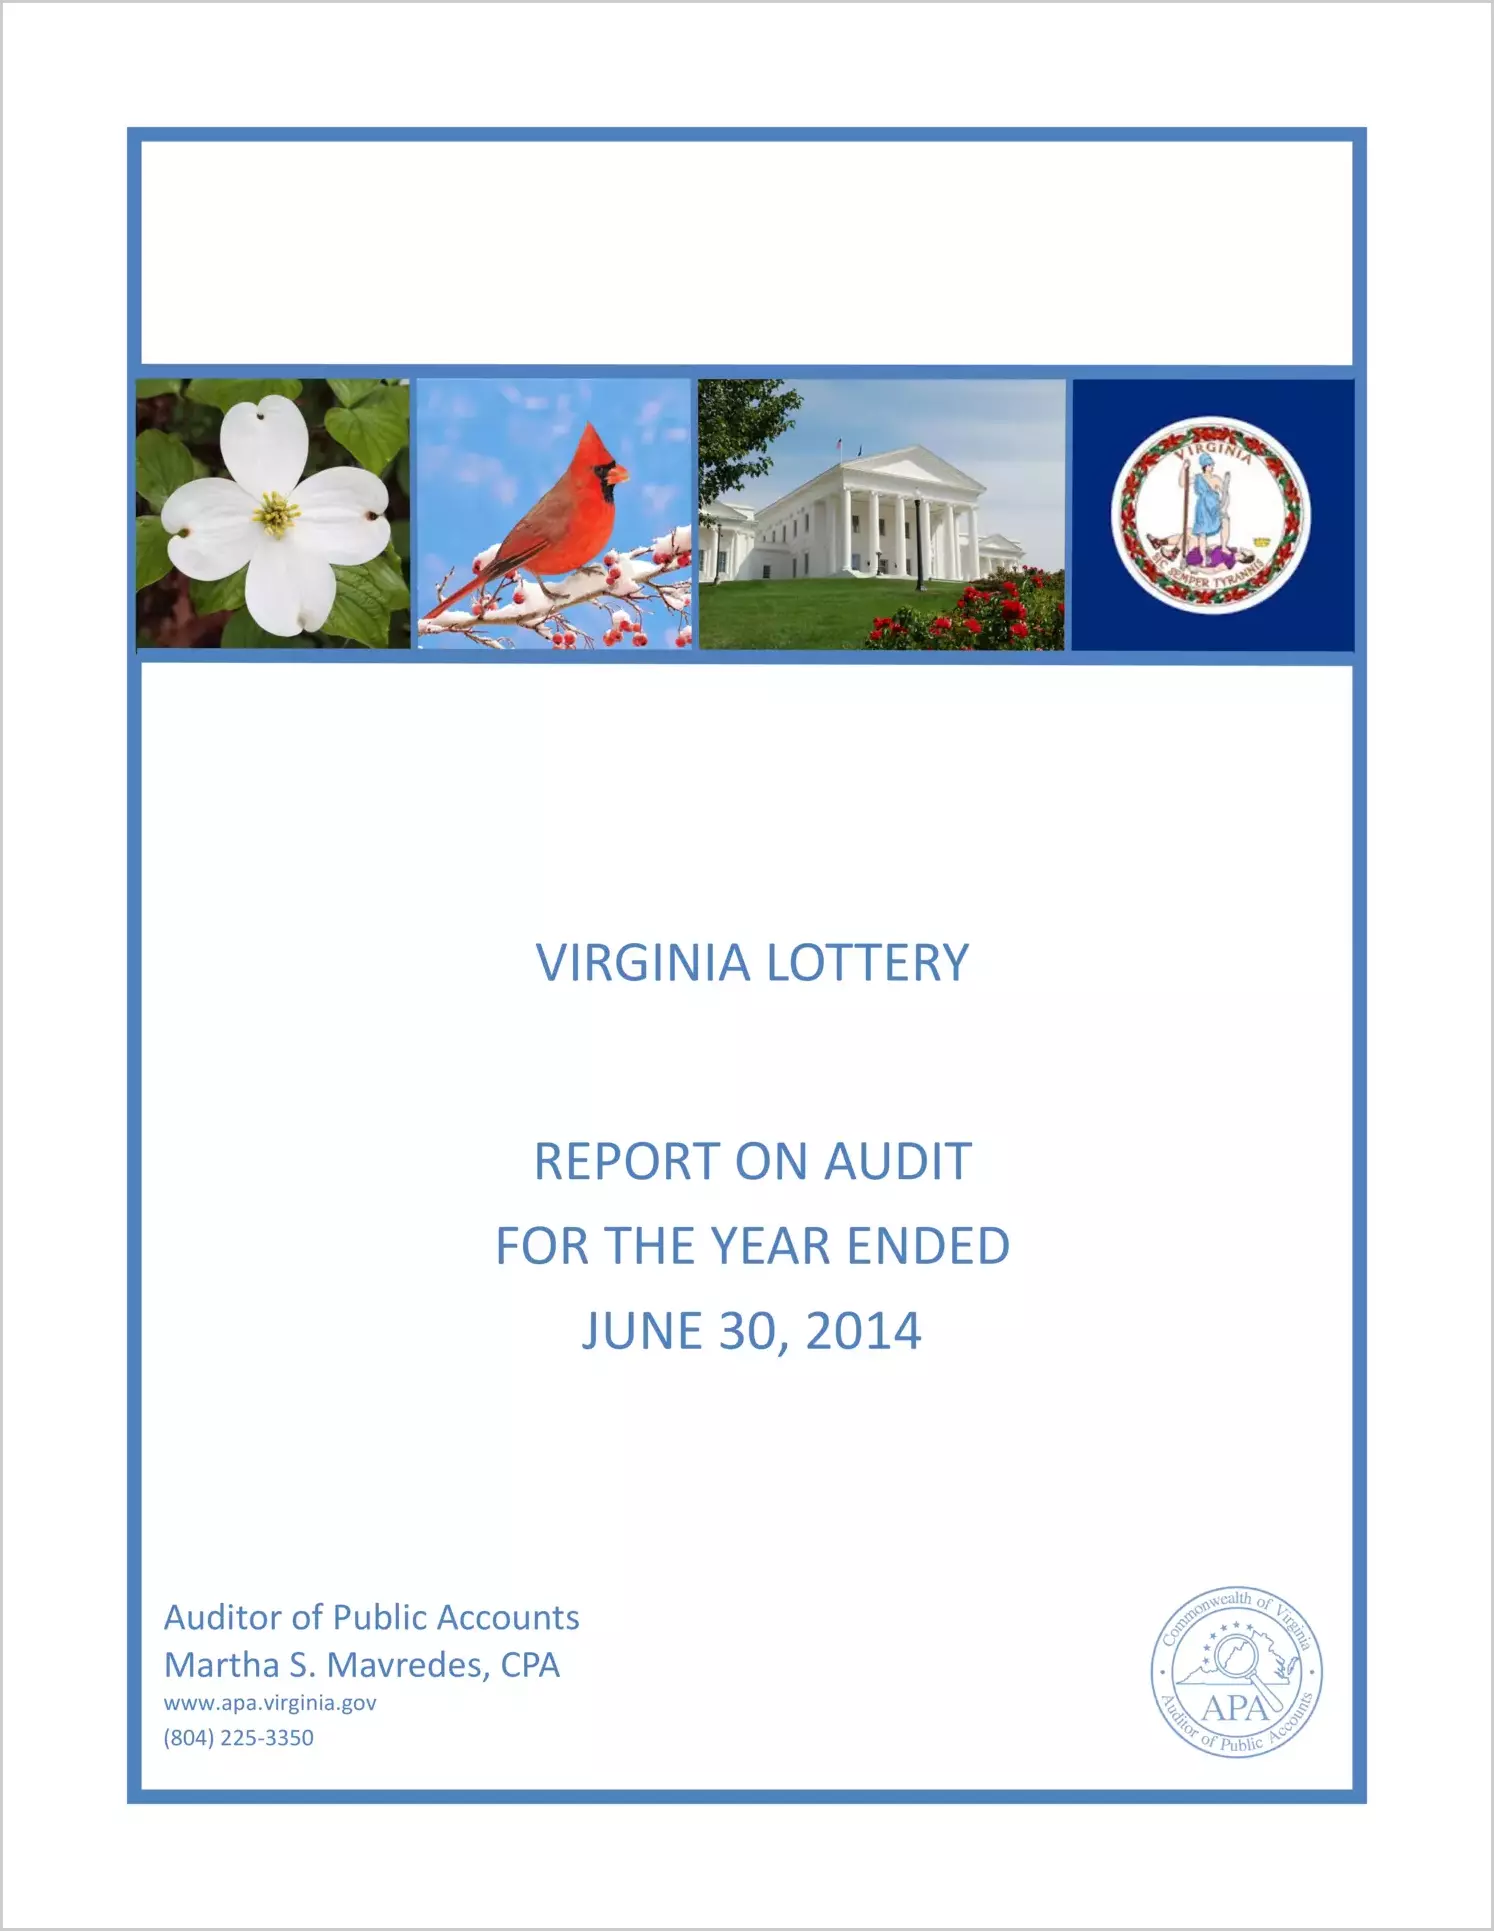 Virginia State Lottery Department for the year ended June 30, 2014